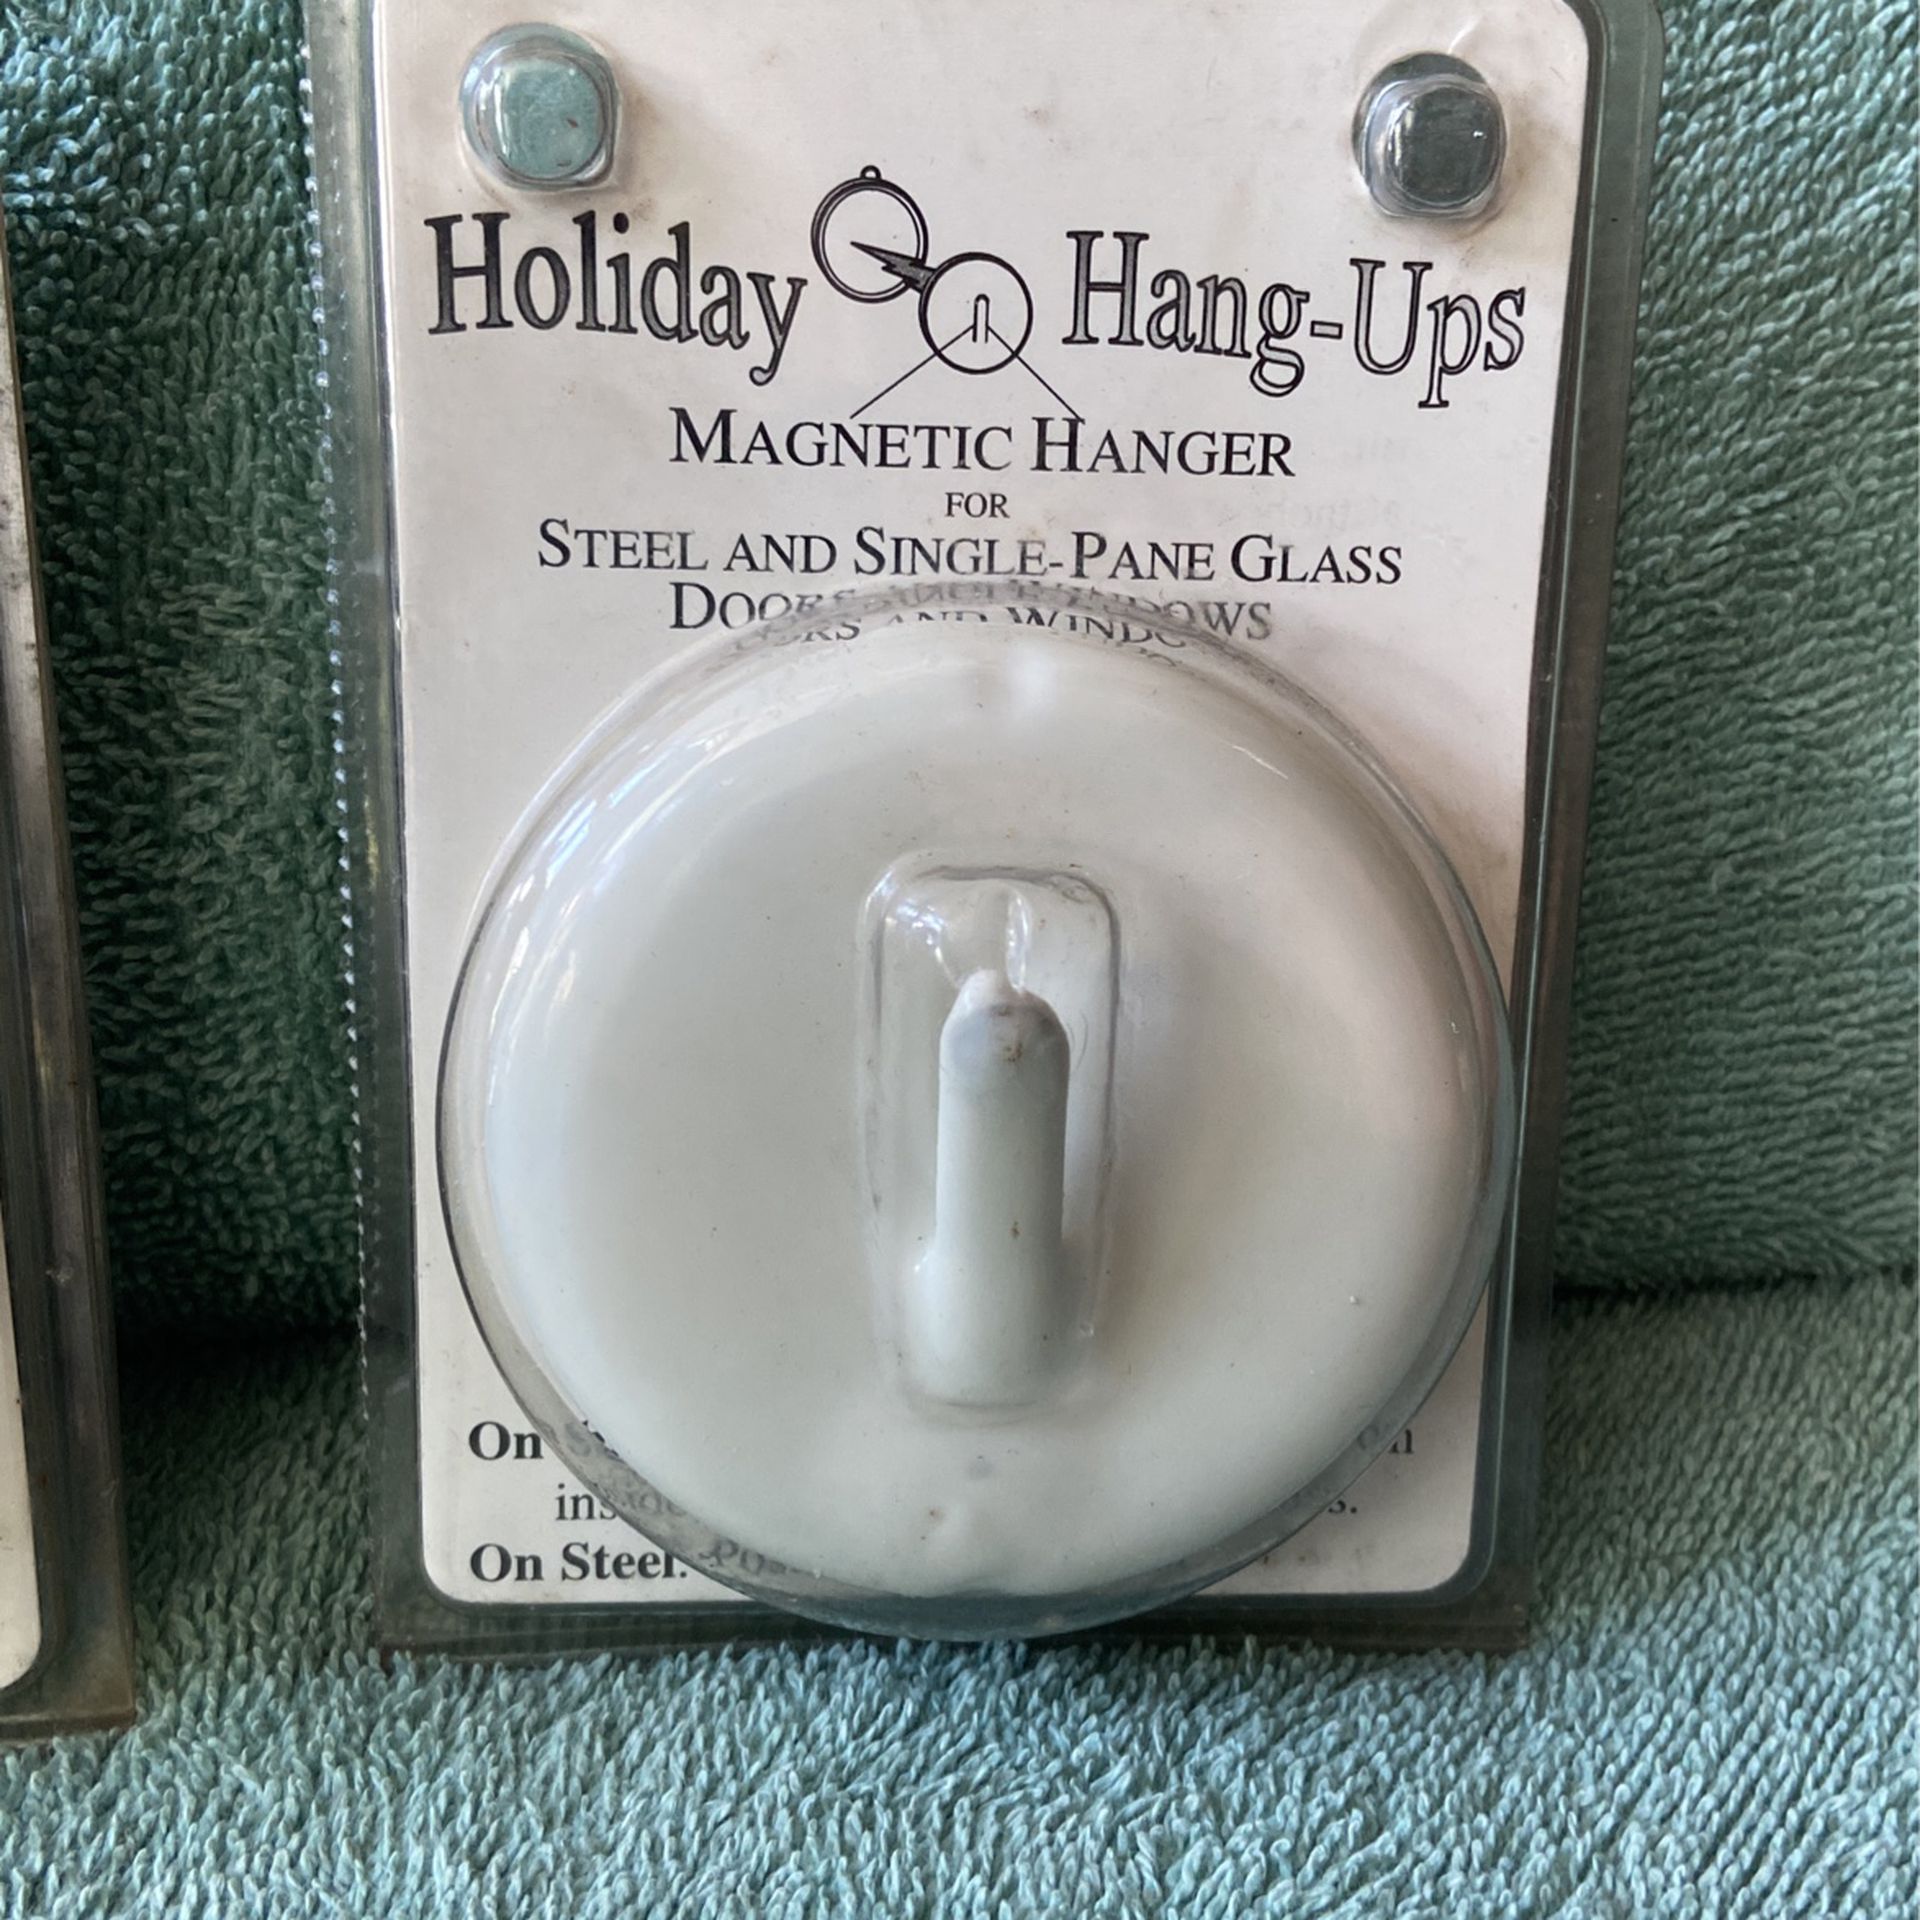 Magnetic Hanger For Wreaths Or Other Uses